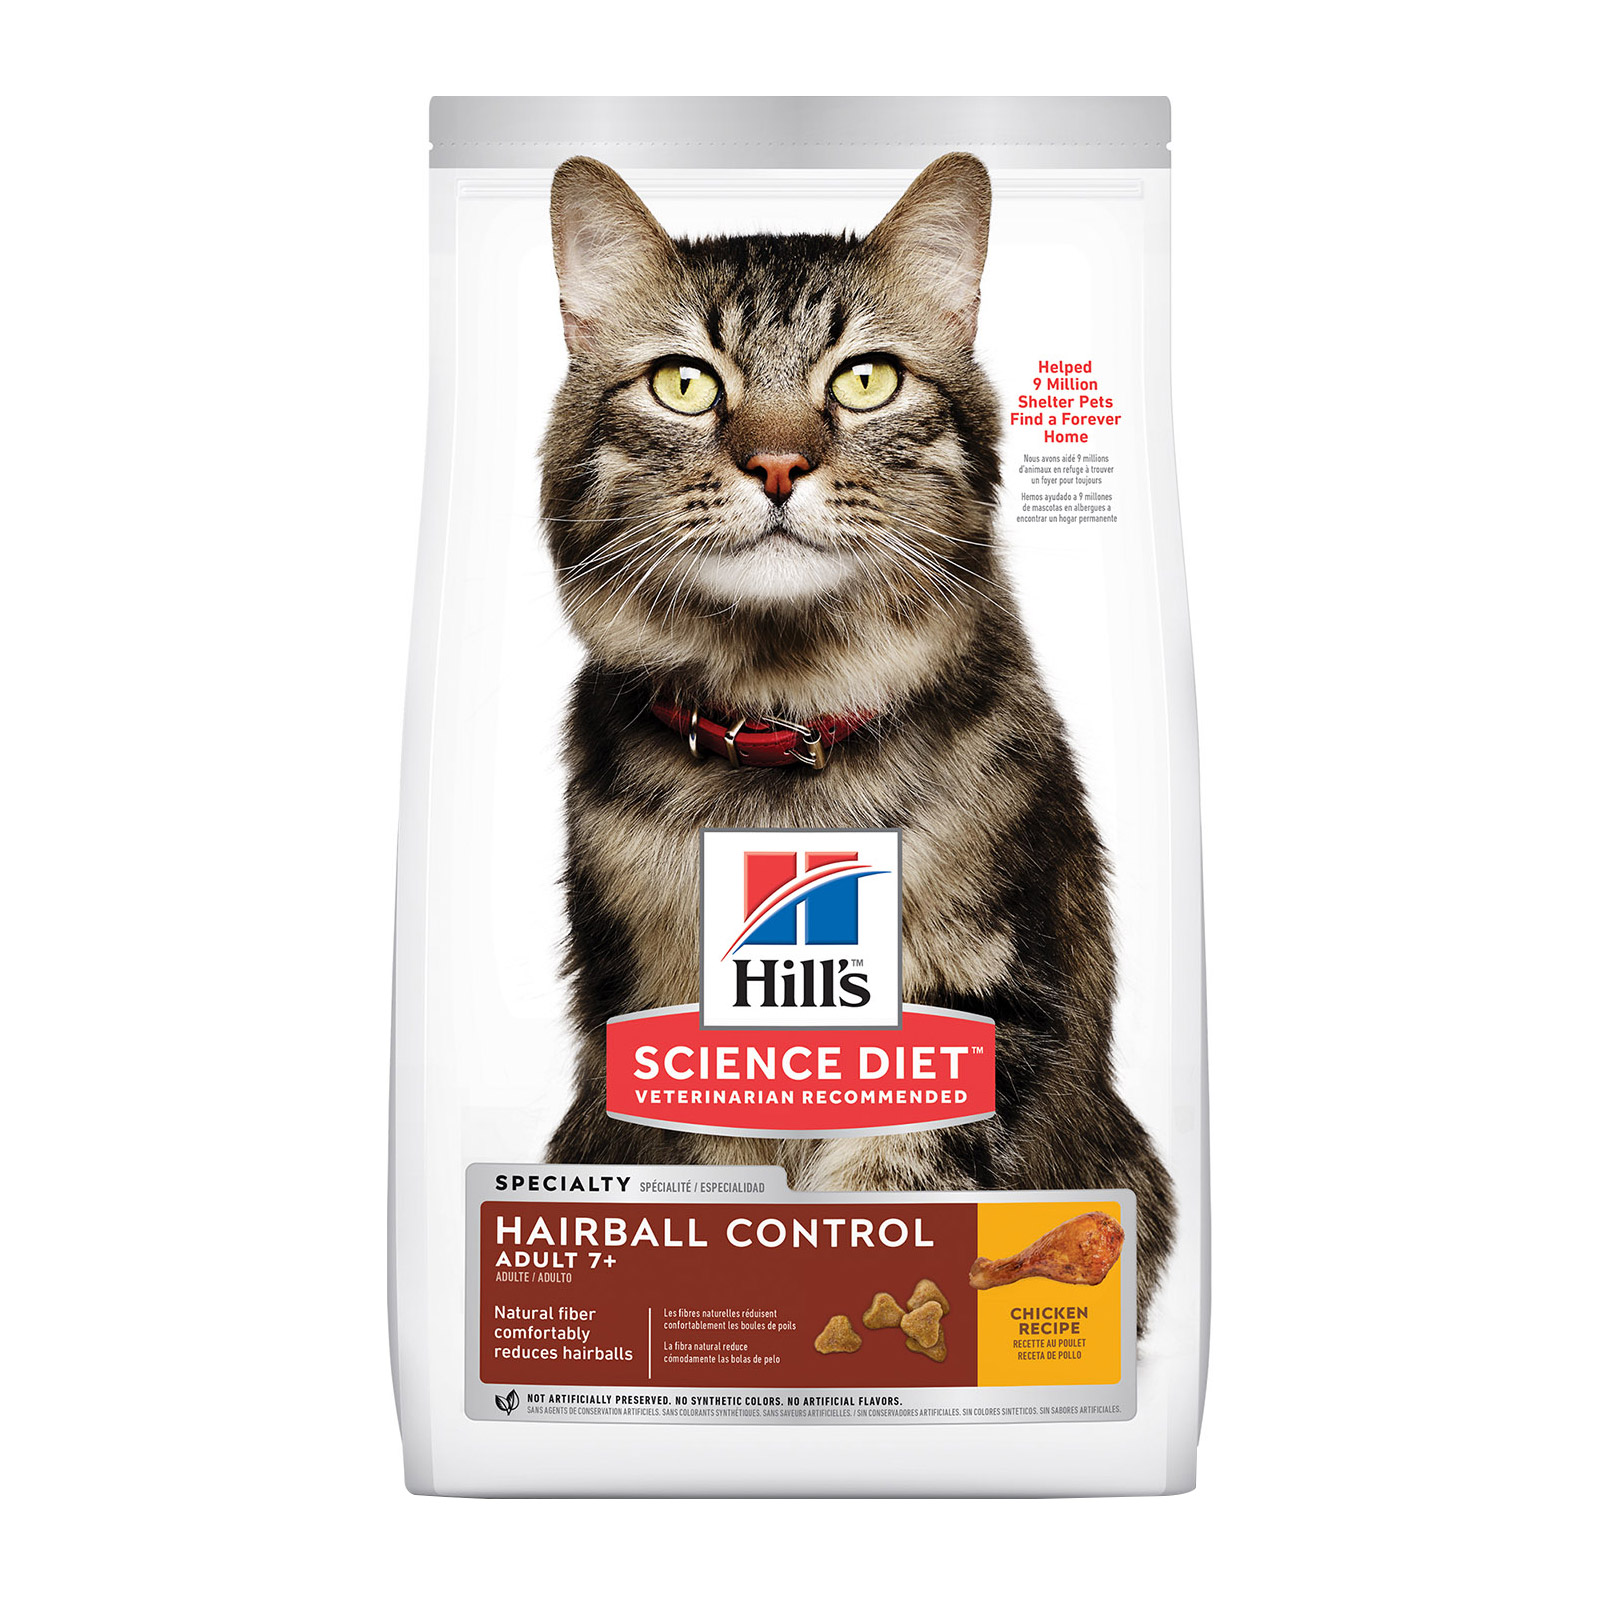 Hill's Science Diet Adult 7+ Hairball Control Chicken Senior Dry Cat Food for Food